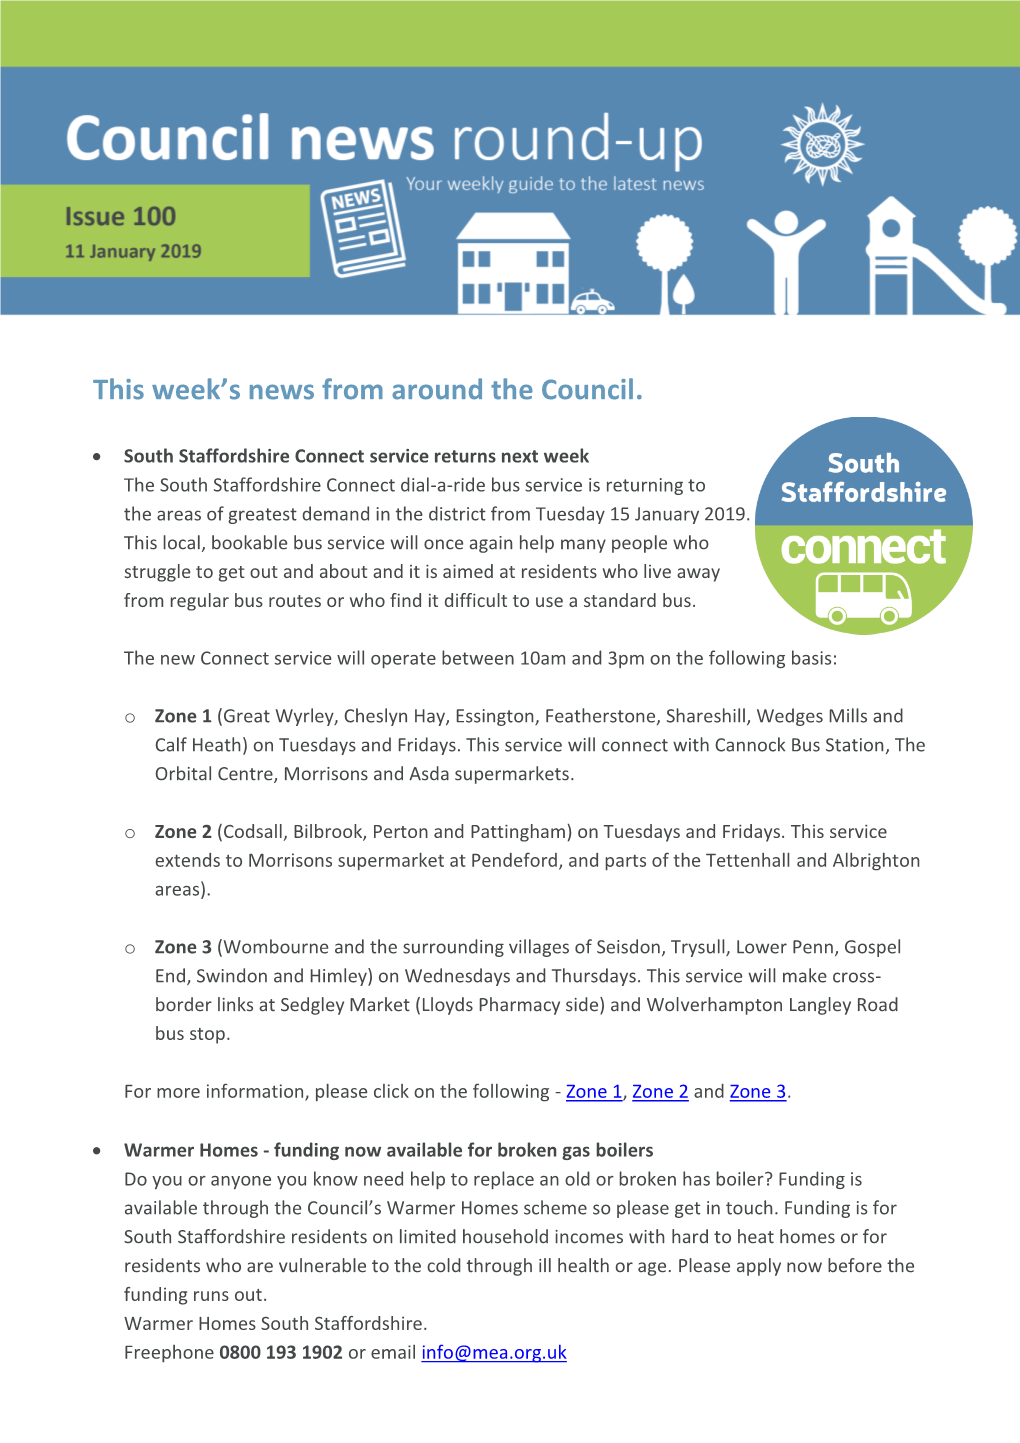 This Week's News from Around the Council